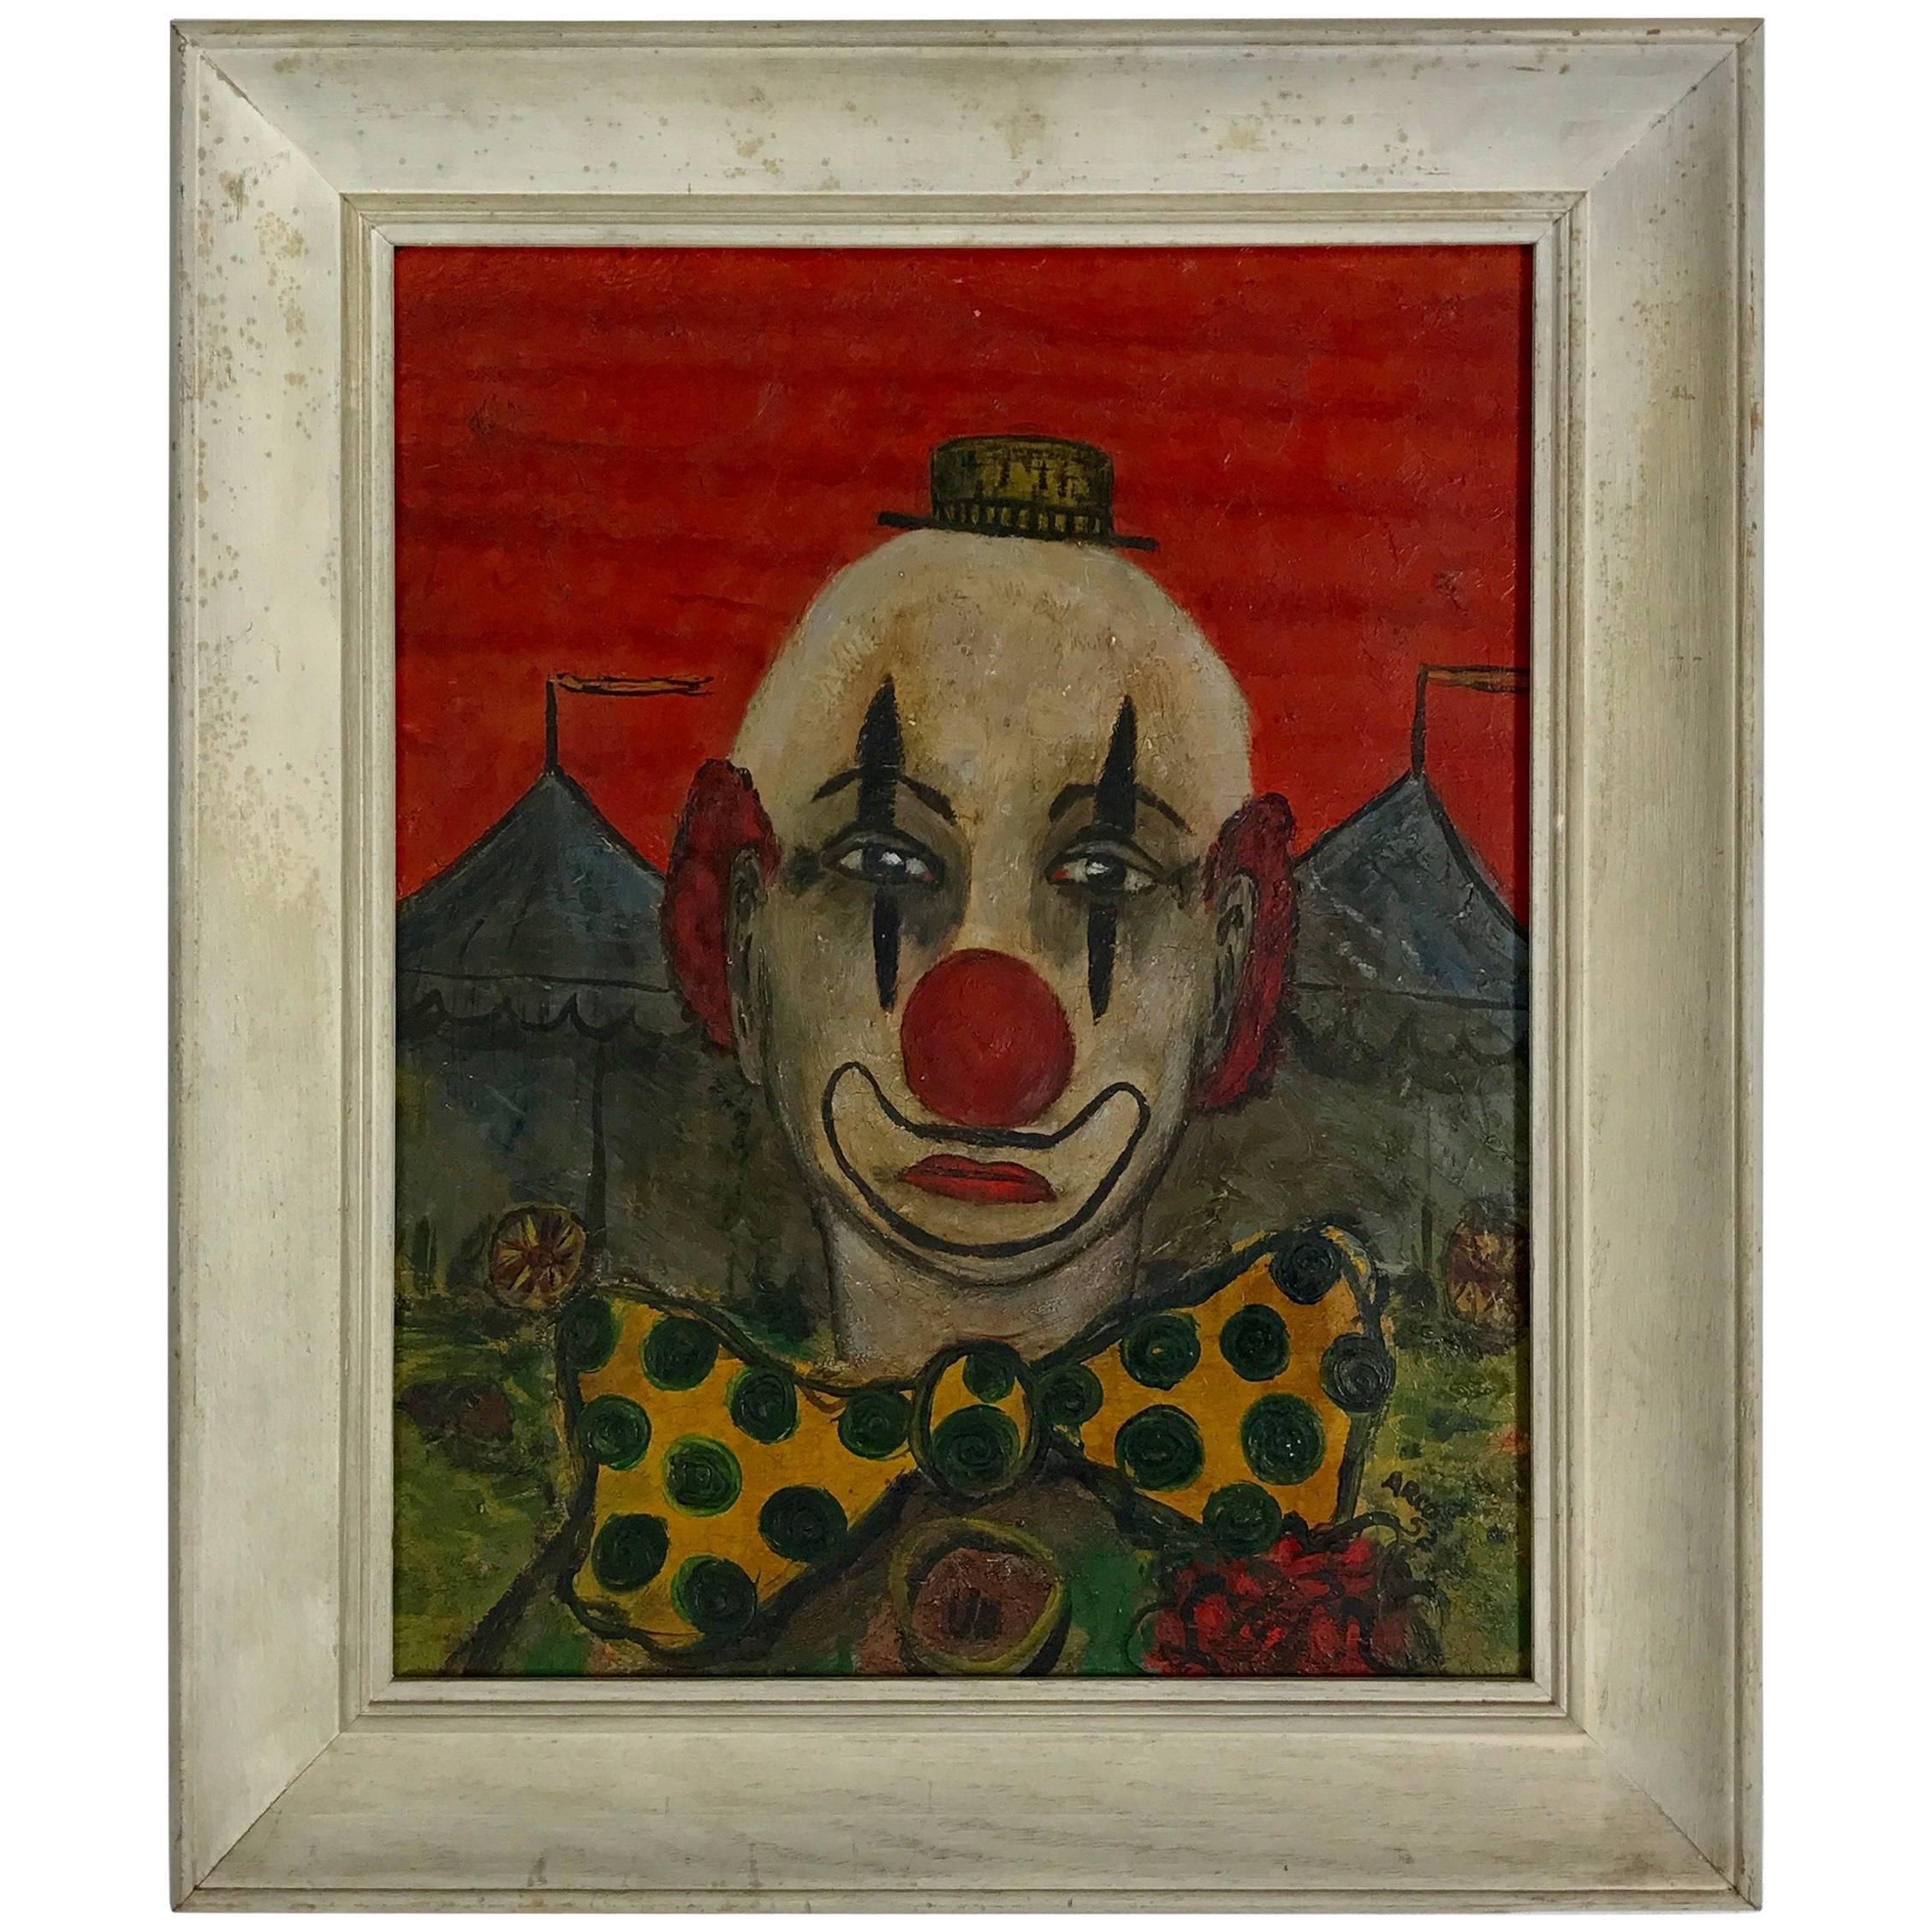 Whimsical Oil on Board Painting 'Clown by Joe Arcos 1952